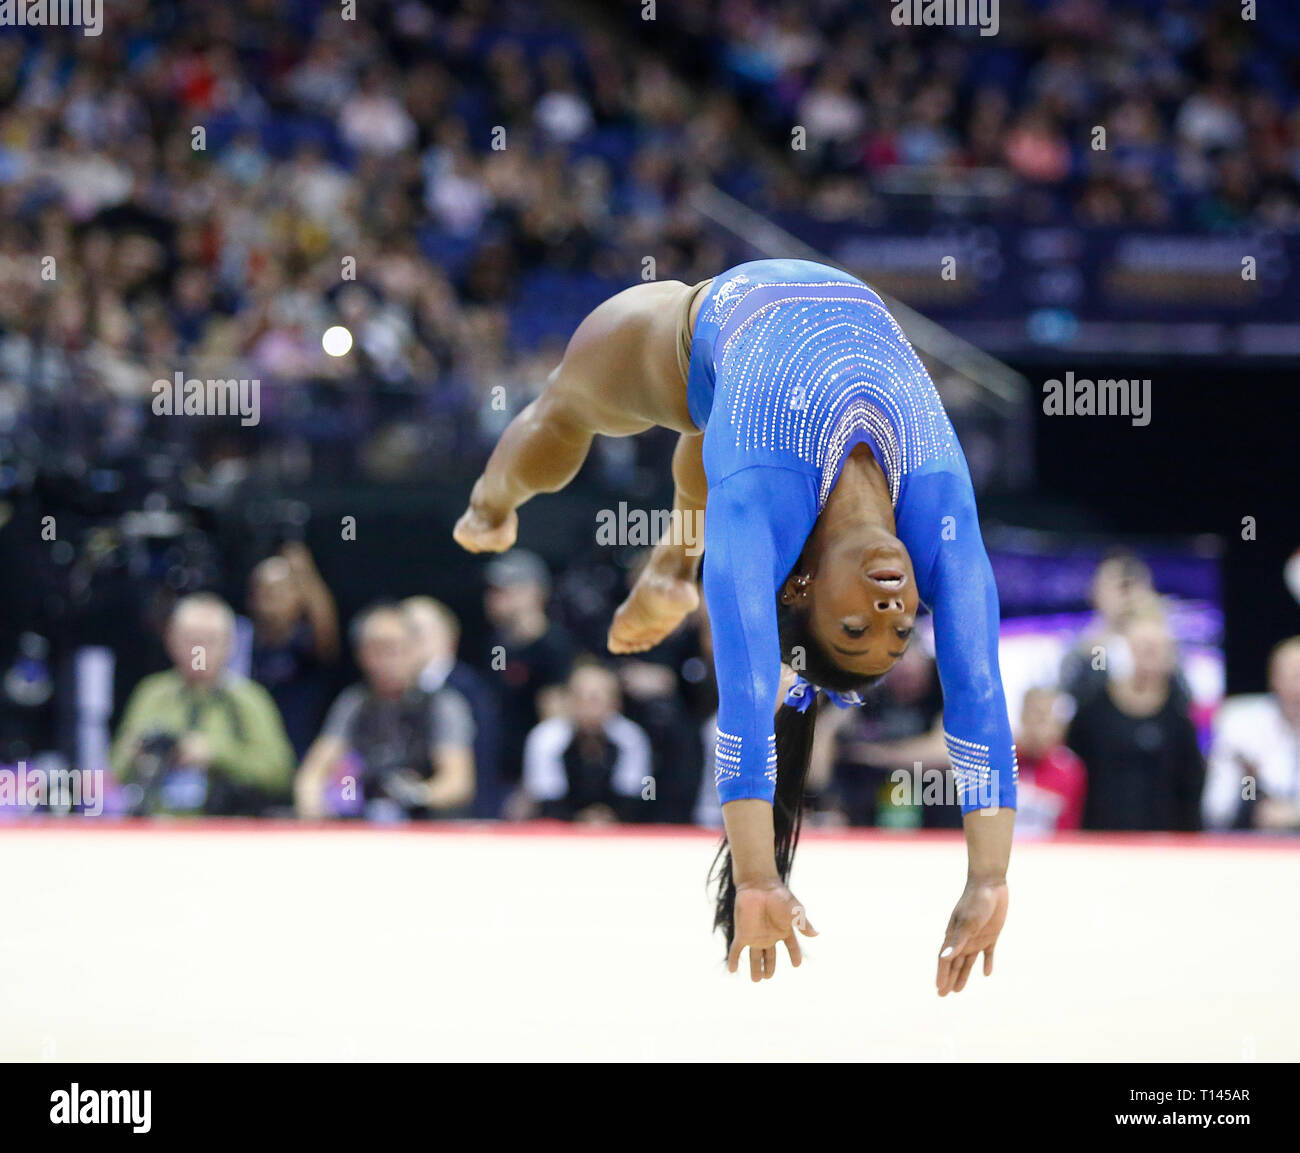 London, UK. 23rd Mar, 2019. London, 23 March, 2019 Simone Biles of USA during her floor performance during The Superstars of Gymnastics at 02 Areana, London, England on 23 Mar 2019. Credit: Action Foto Sport/Alamy Live News Stock Photo